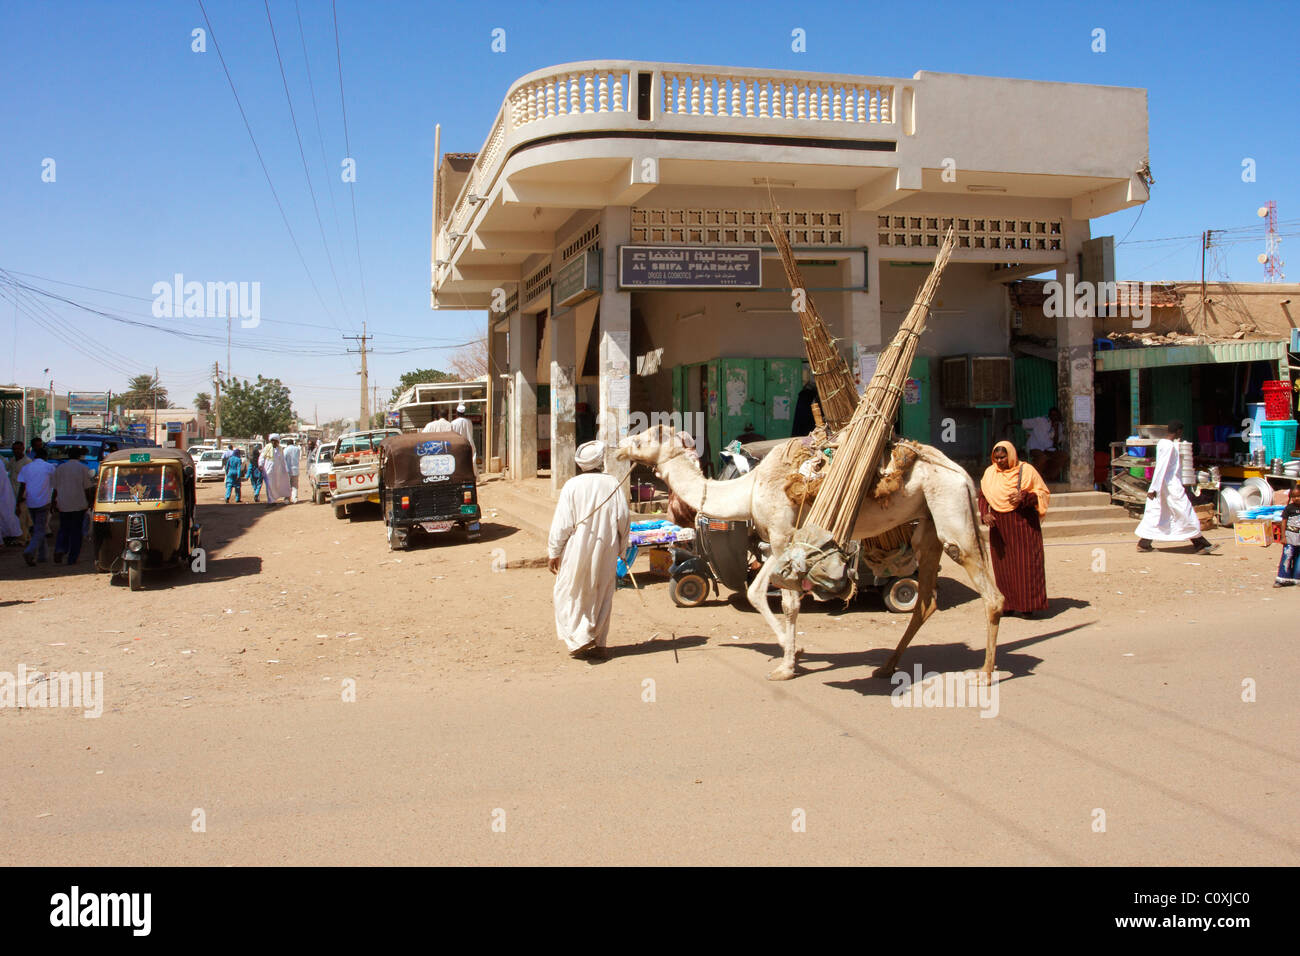 A man is carrying some items on the camel in Dongola city, Sudan Stock Photo